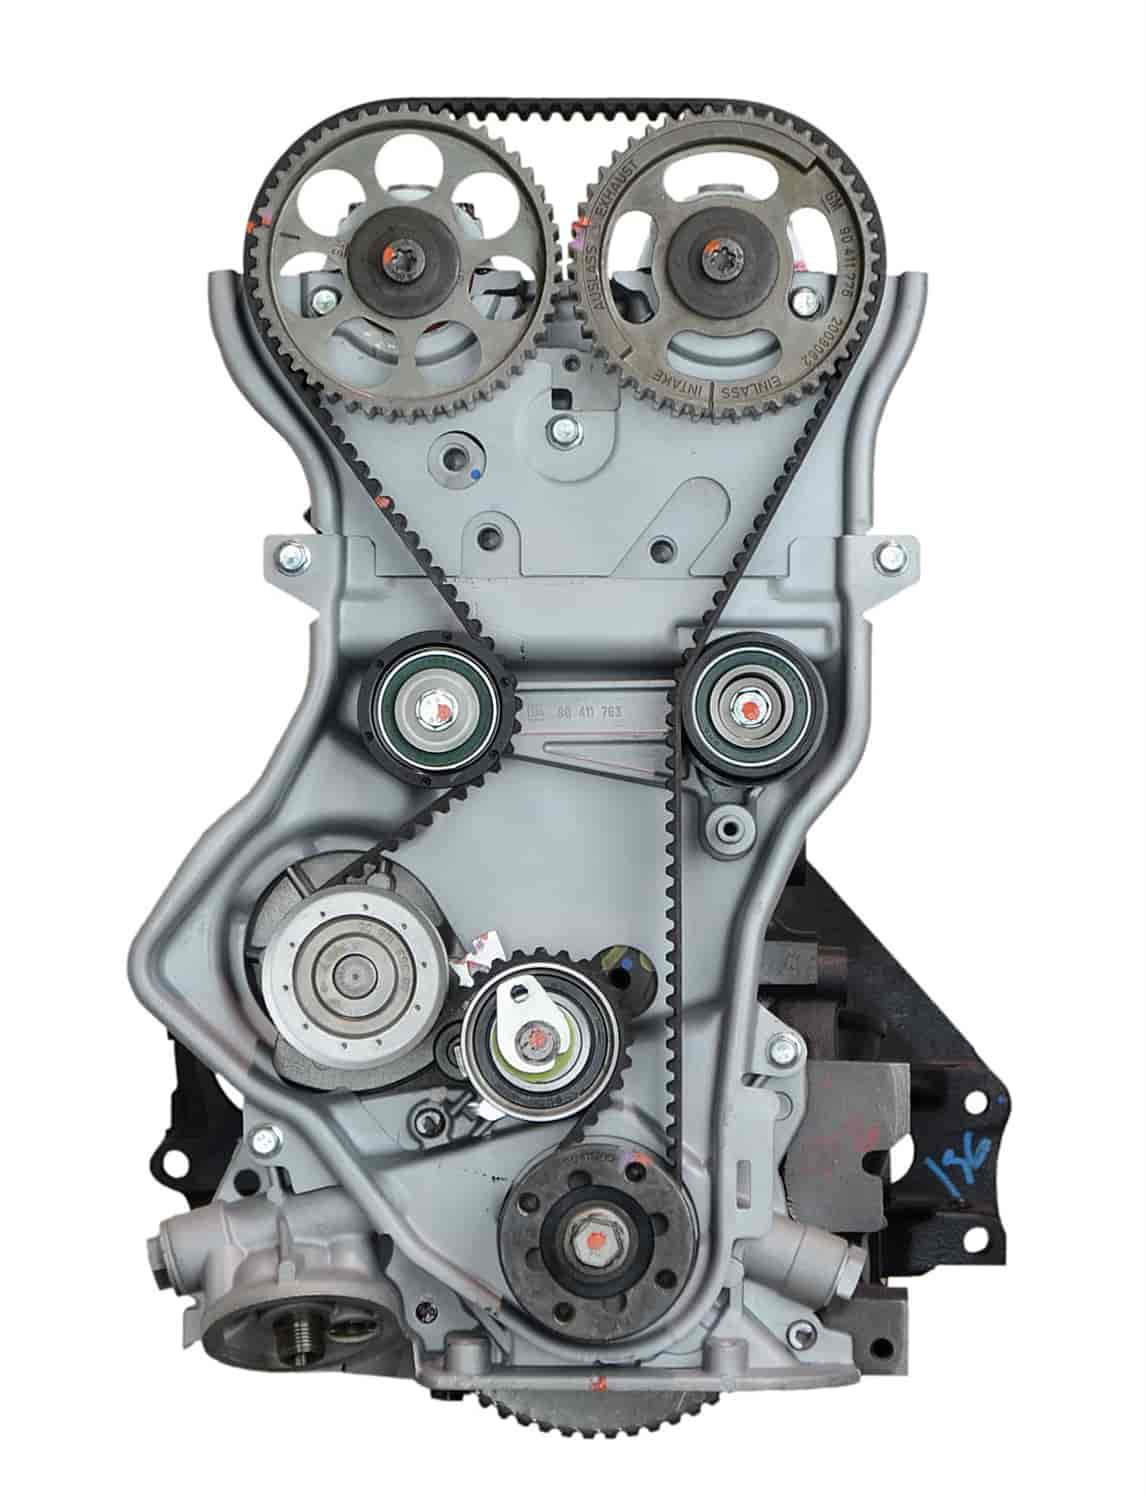 Remanufactured Crate Engine for 1998-2003 Isuzu with 2.2L L4